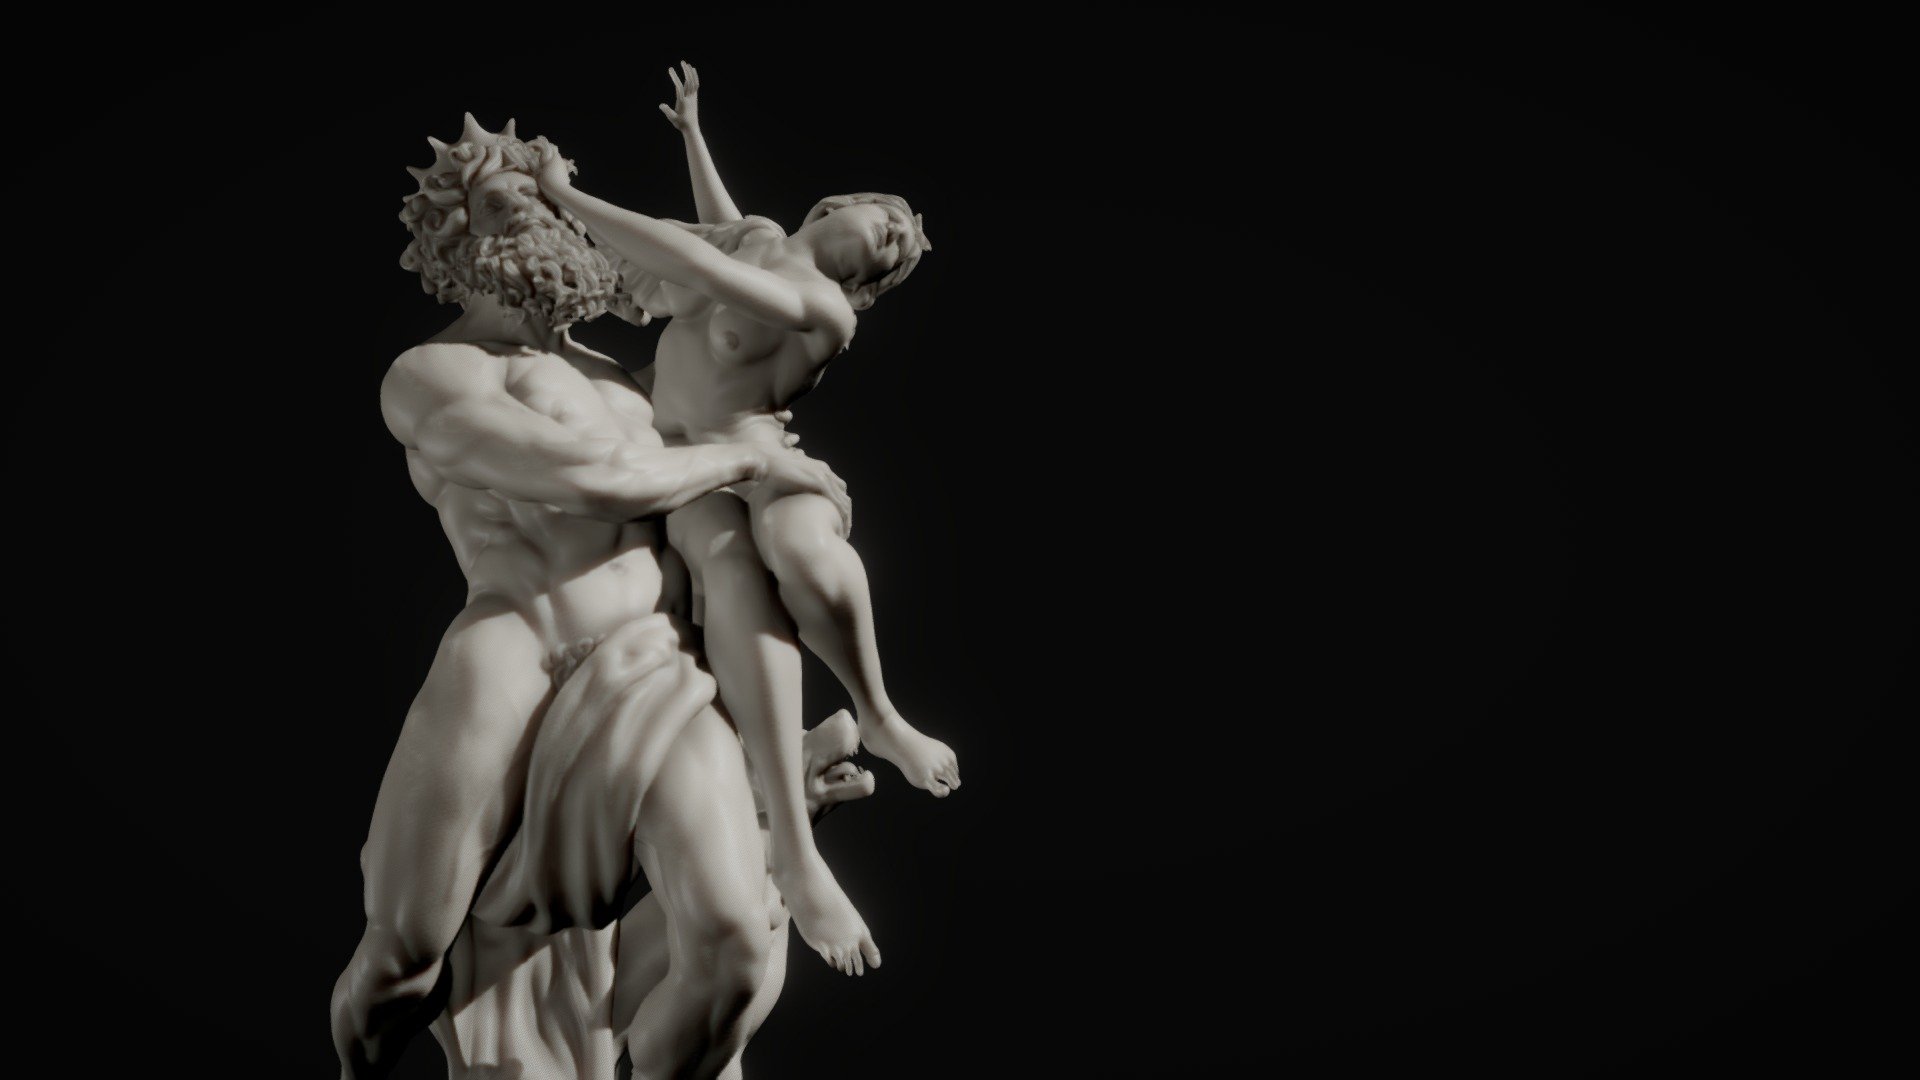 Project sculpted with Zbrush from zero by me about &ldquo;The Rape of Proserpina